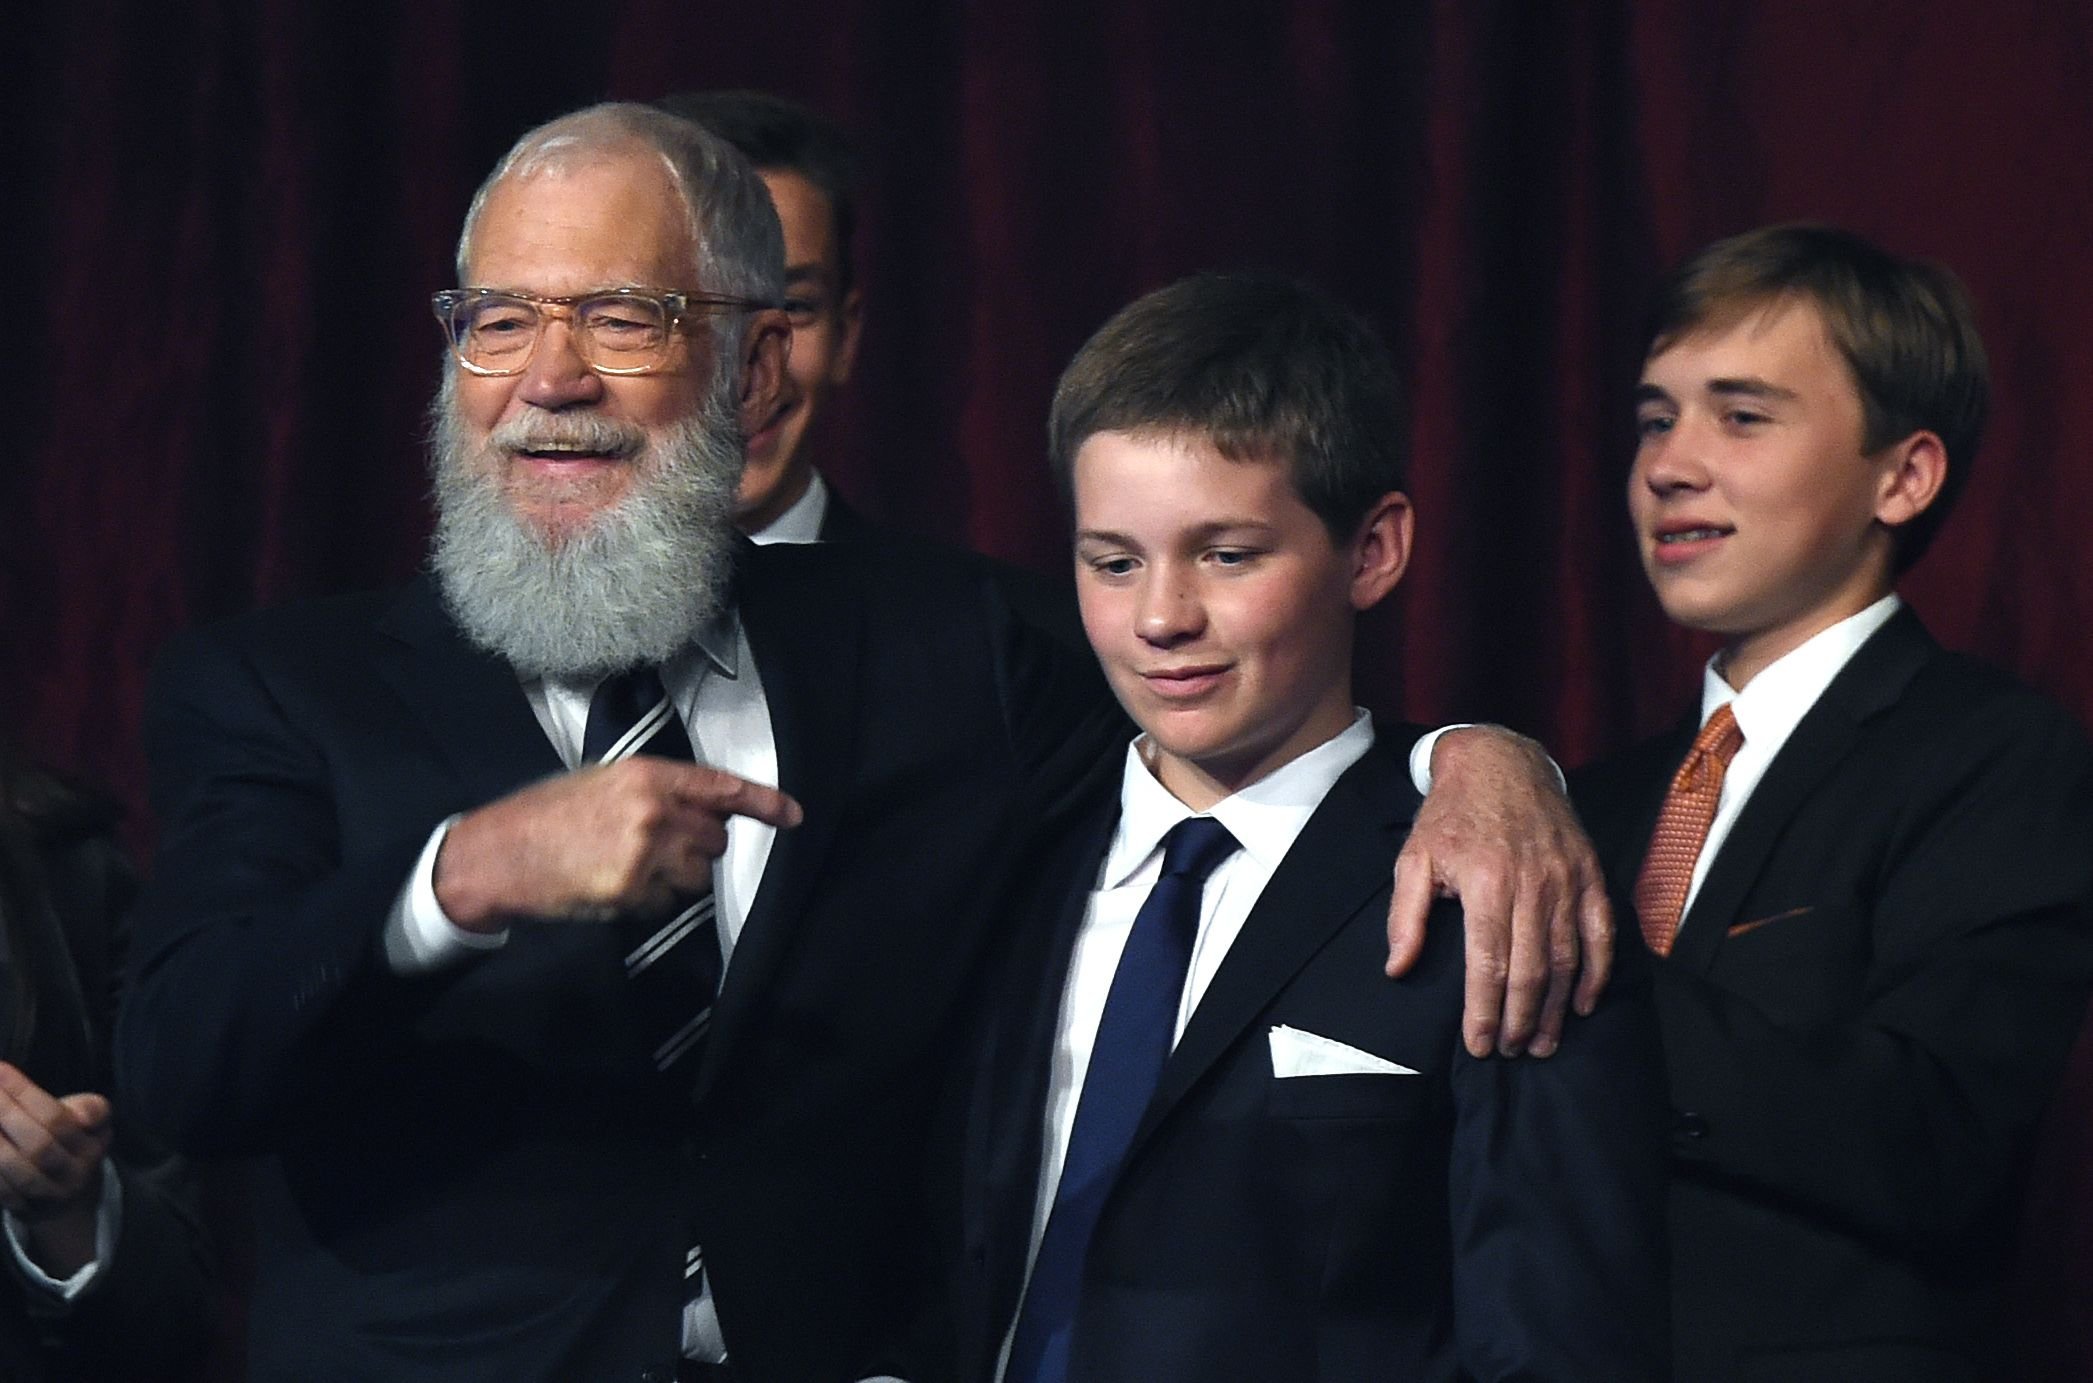 David Letterman and son Harry at the 20th Annual Mark Twain Prize for American Humor in Washington, DC, on October 22, 2017 | Photo: Andrew Caballero-Reynolds/Getty Images